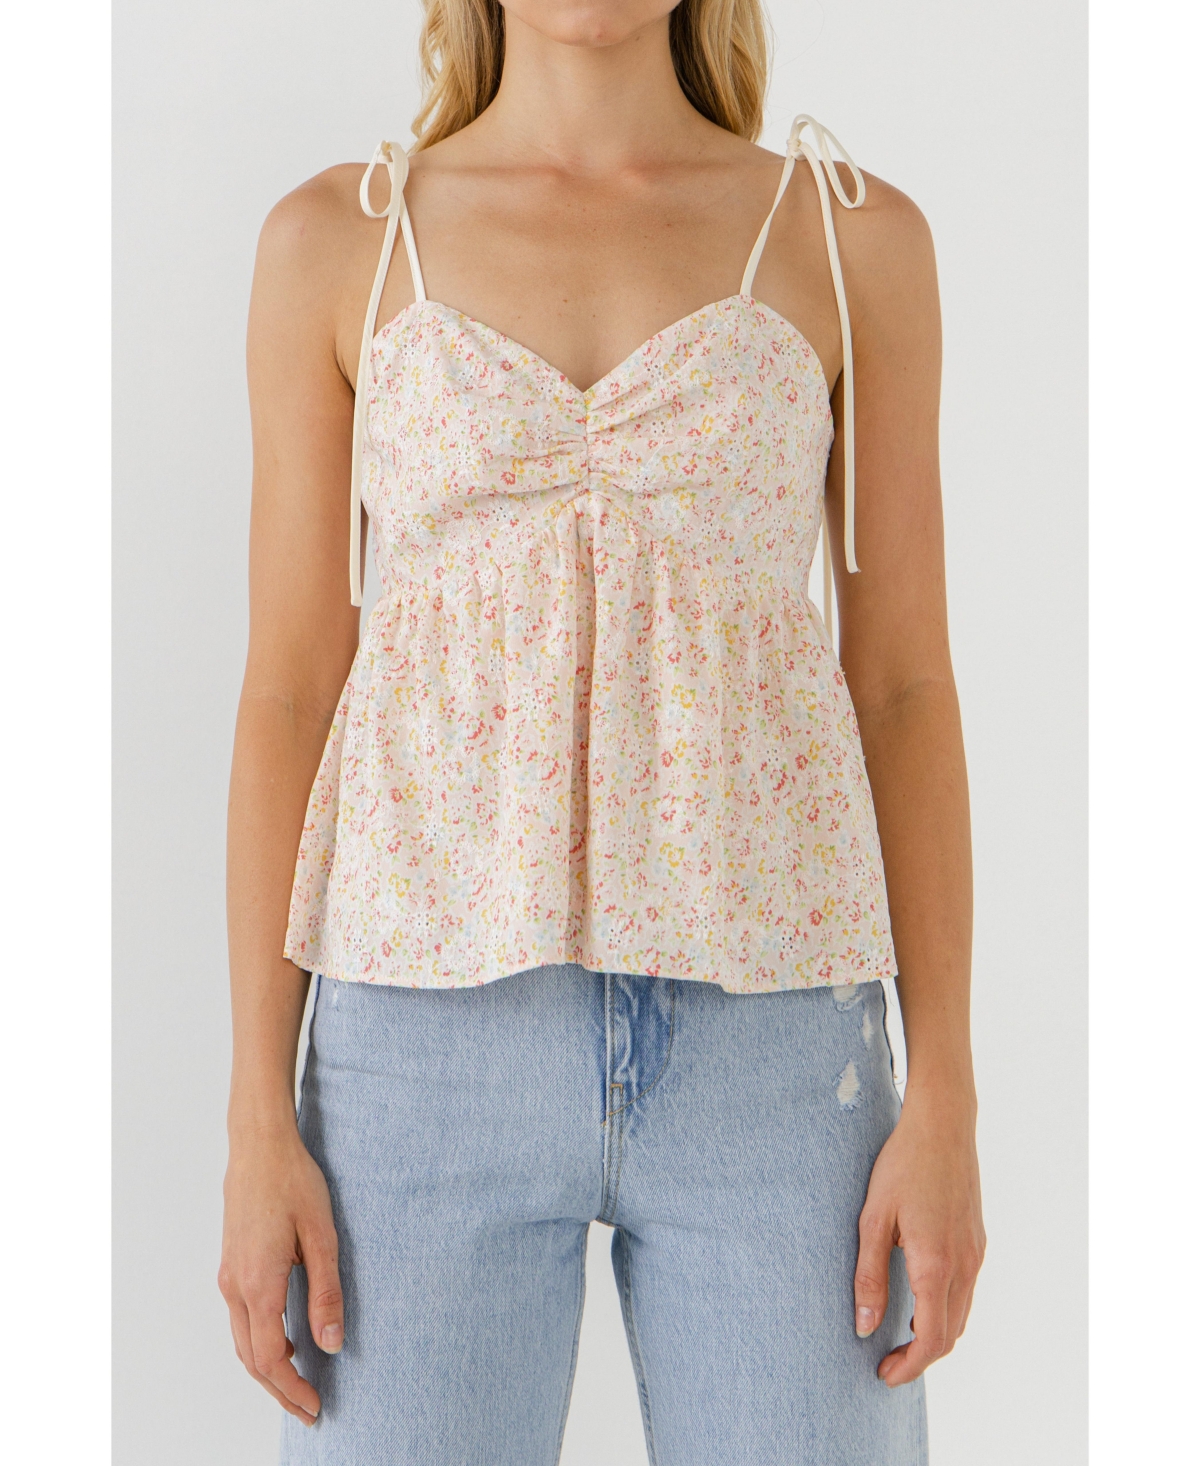 Women's Straps with Floral Top - Pink multi